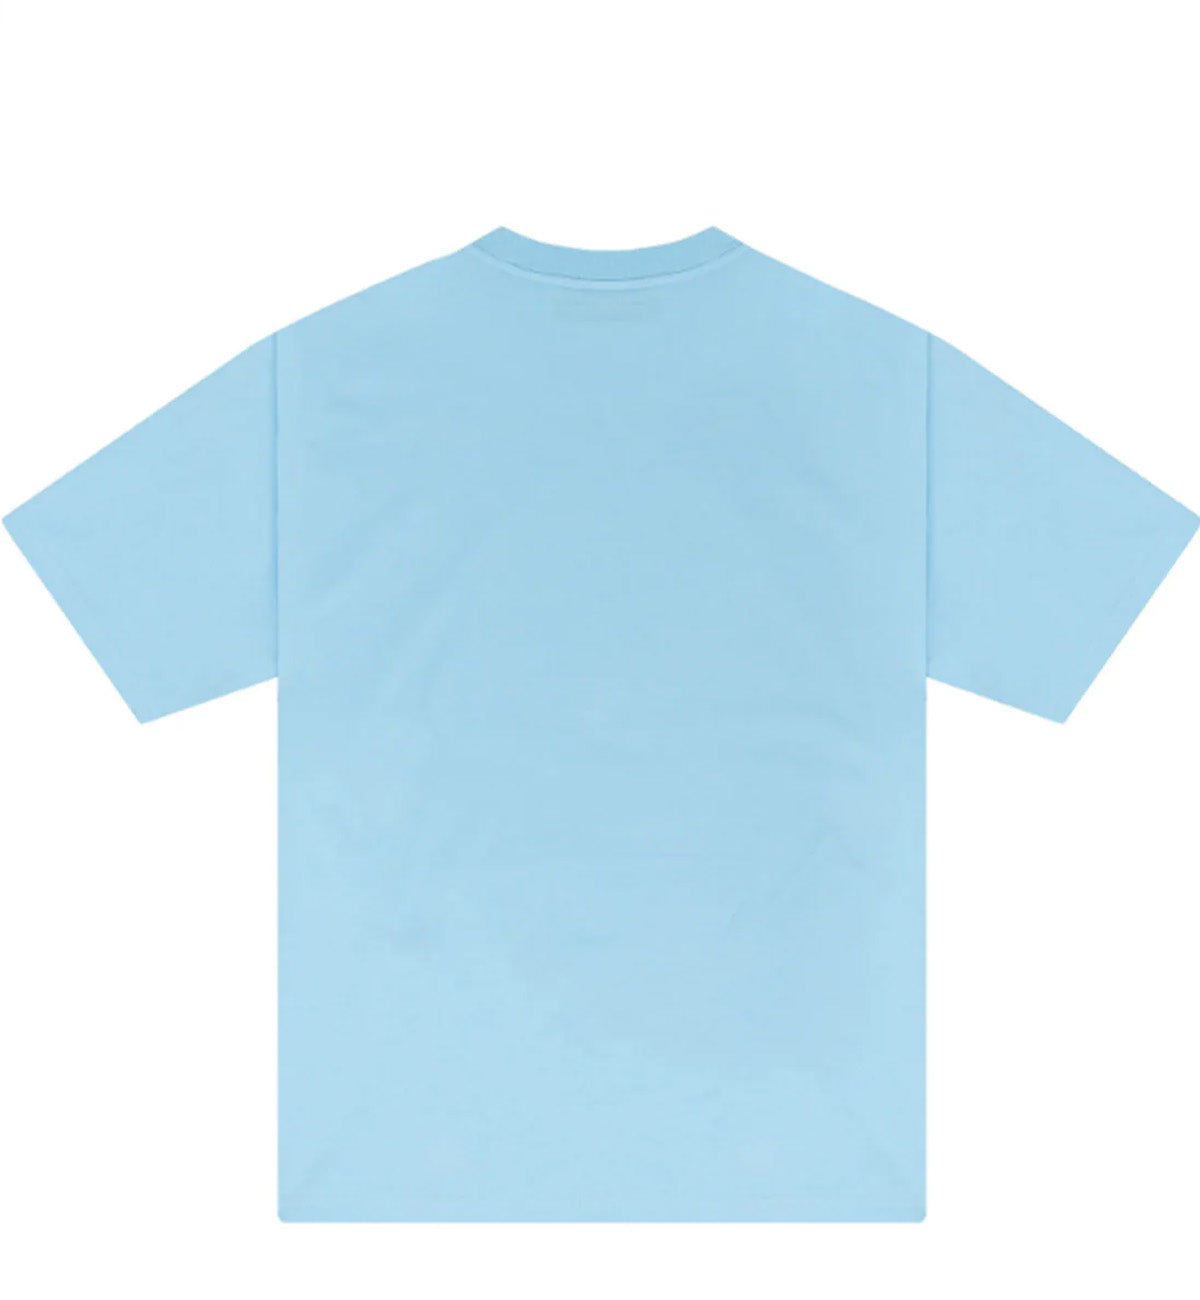 Drew House SS23 Bowie Pacific Blue